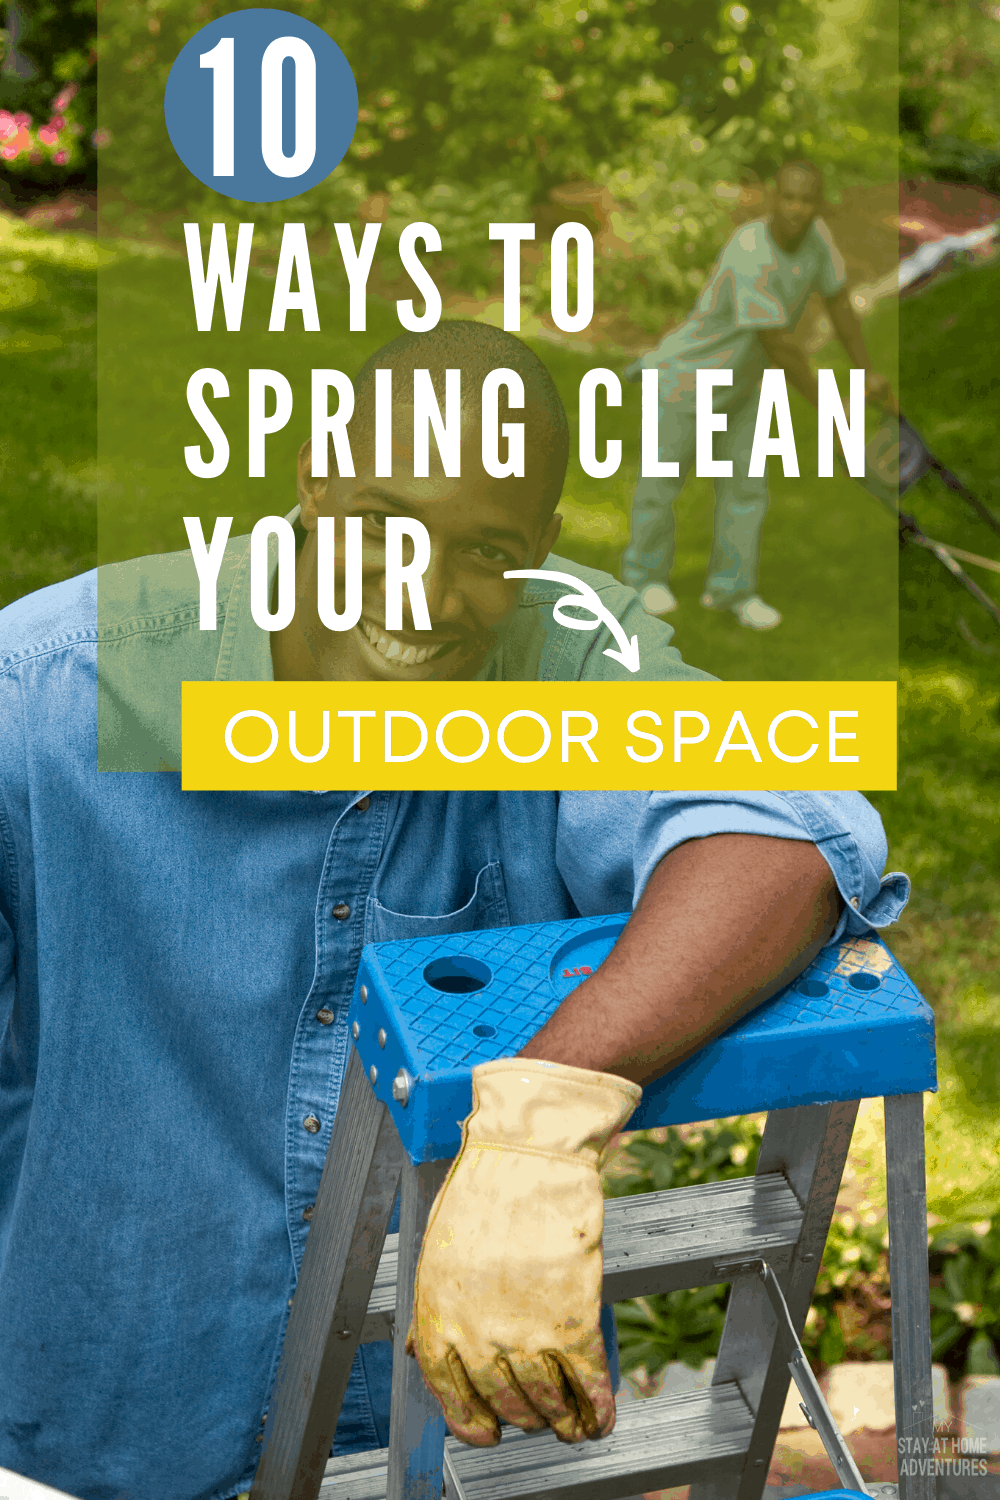 Spring cleaning is not just about indoors but outdoors as well. Learn ten tricks to spring clean your outdoor space that are effective. via @mystayathome